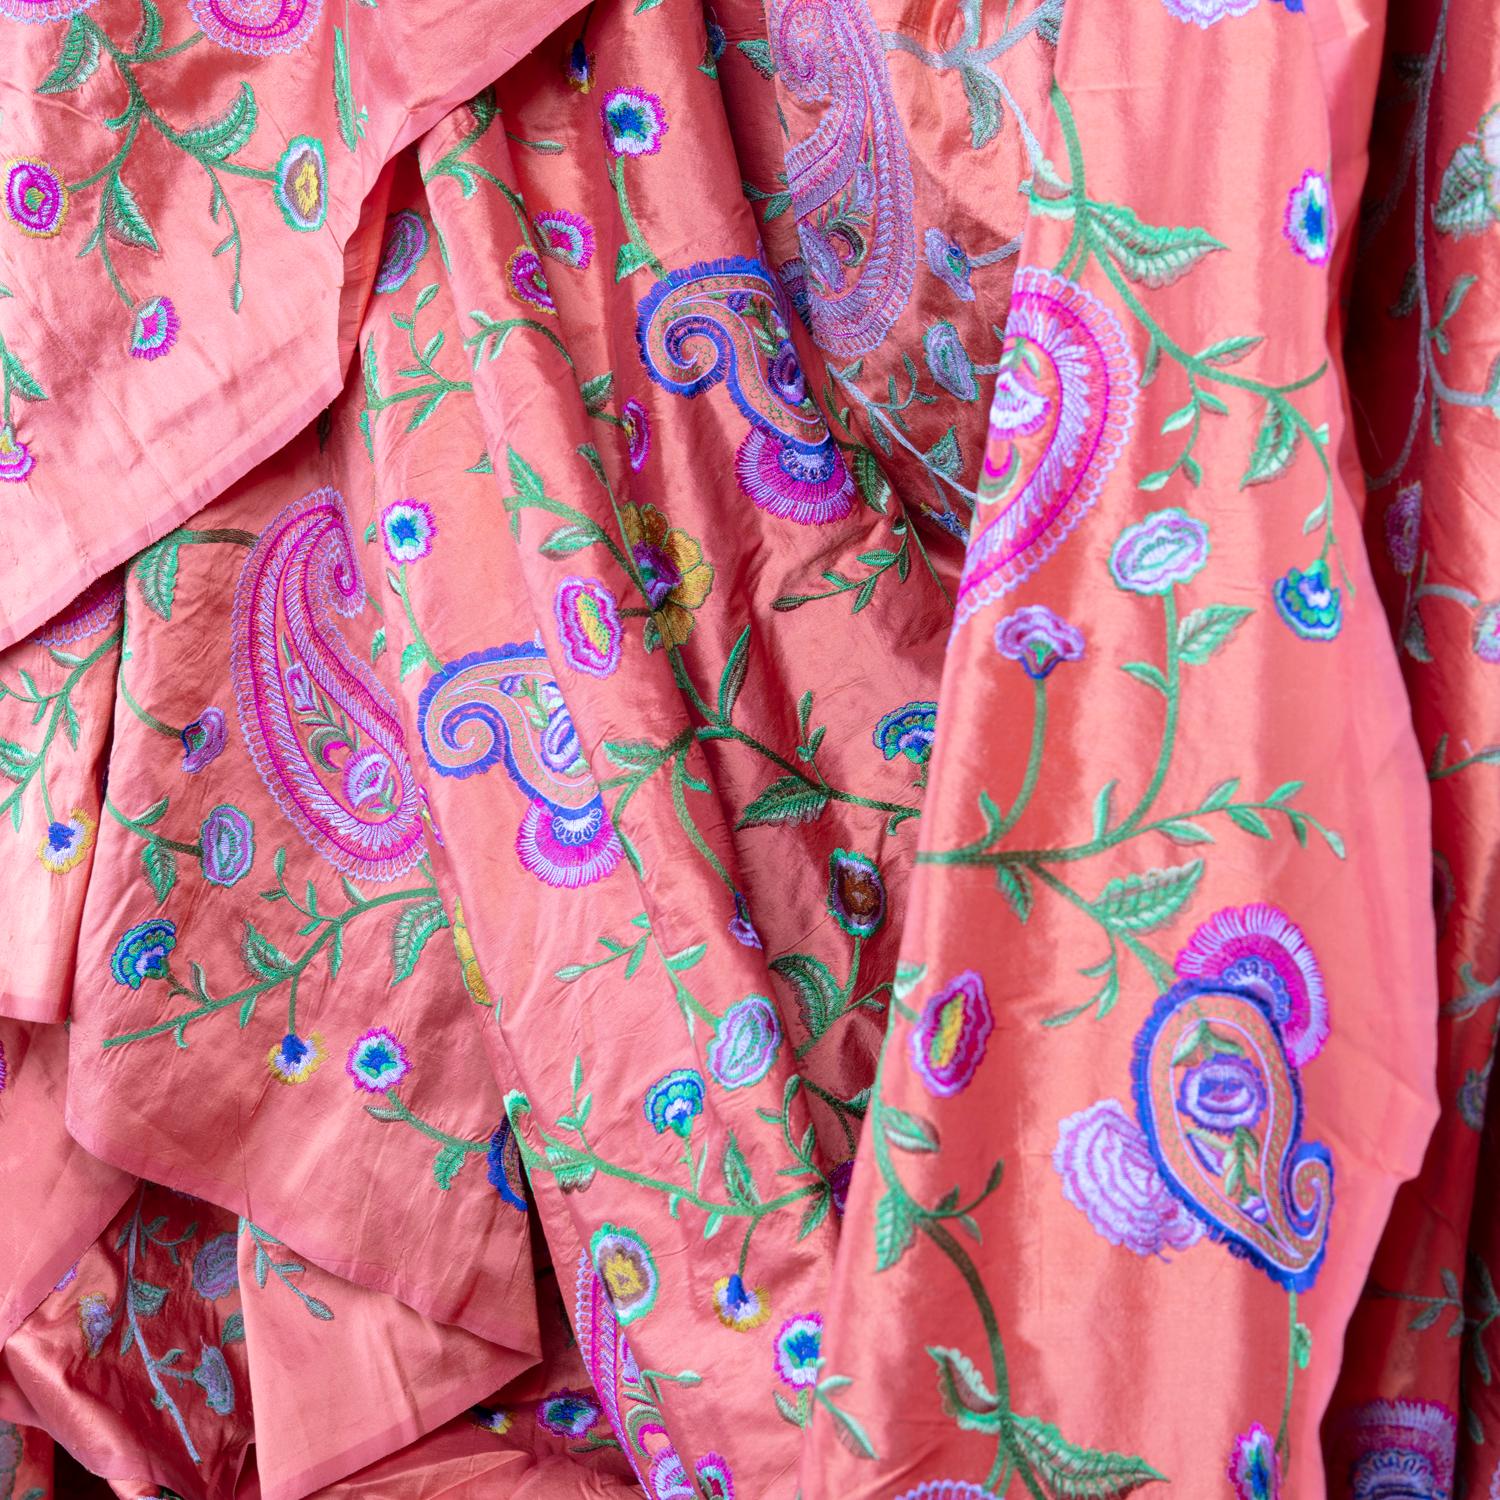 This unique vintage handicraft made by tailored artisans, is likely to never to be created again. This brilliant coral colored raw silk woven into a fine satin weave and embellished with hand-hooked embroidery known as 